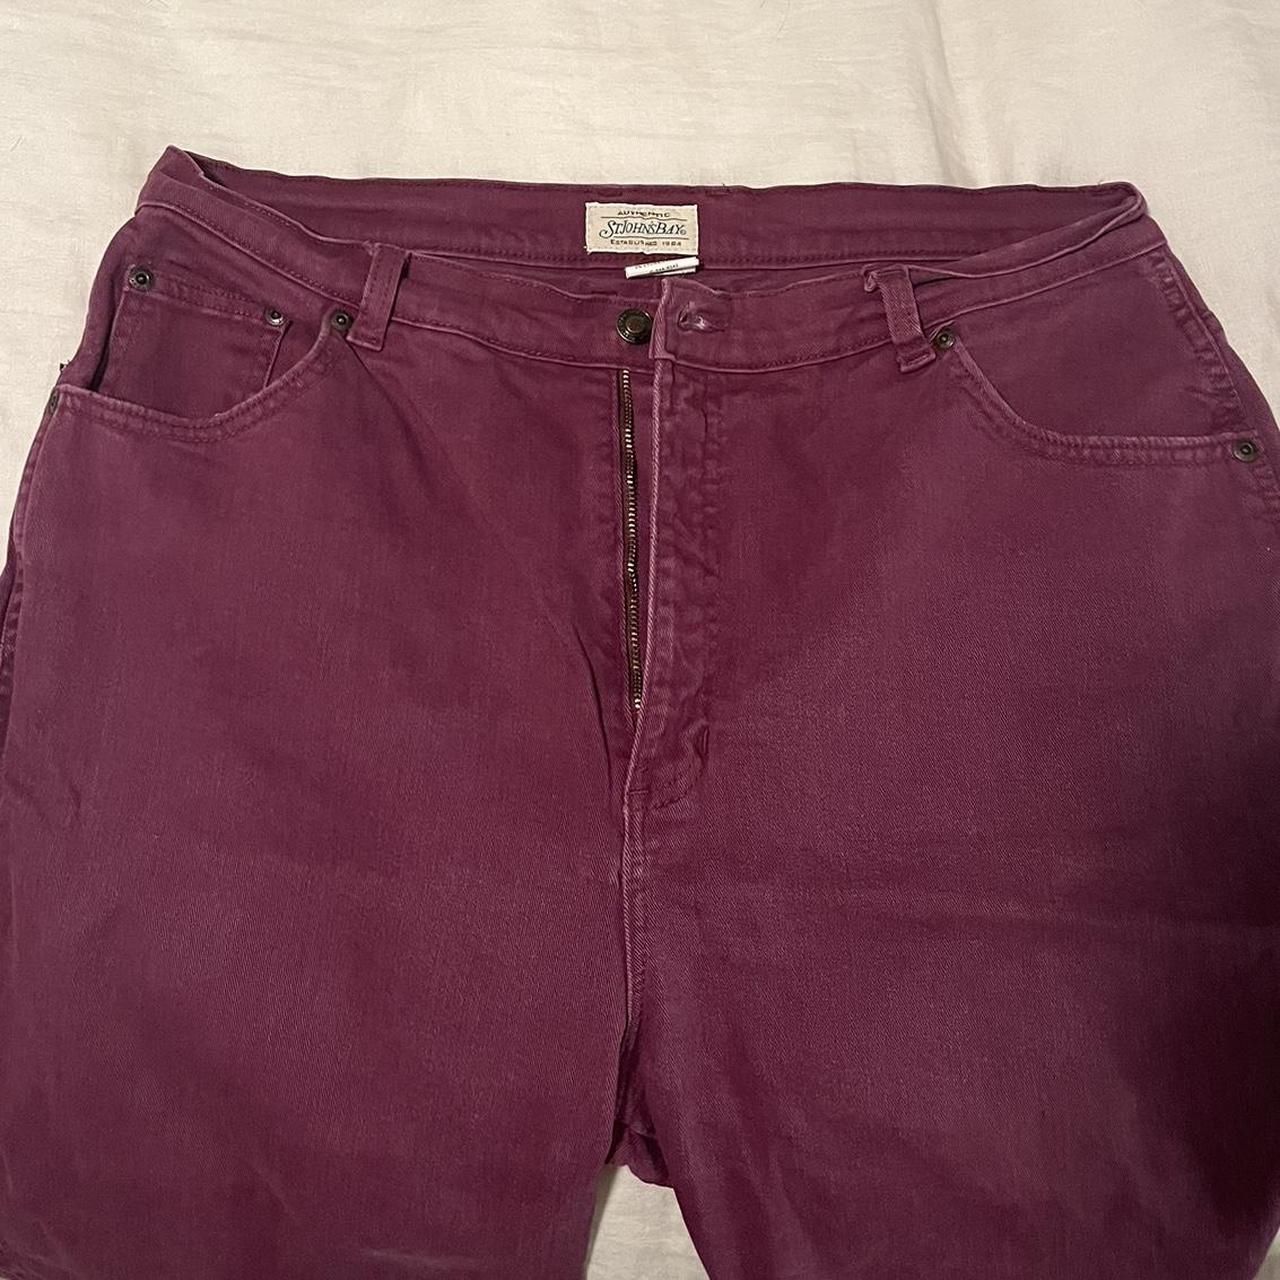 NEW St. Johns Bay Size 16 Skinny Jeans Red/Maroon - Depop